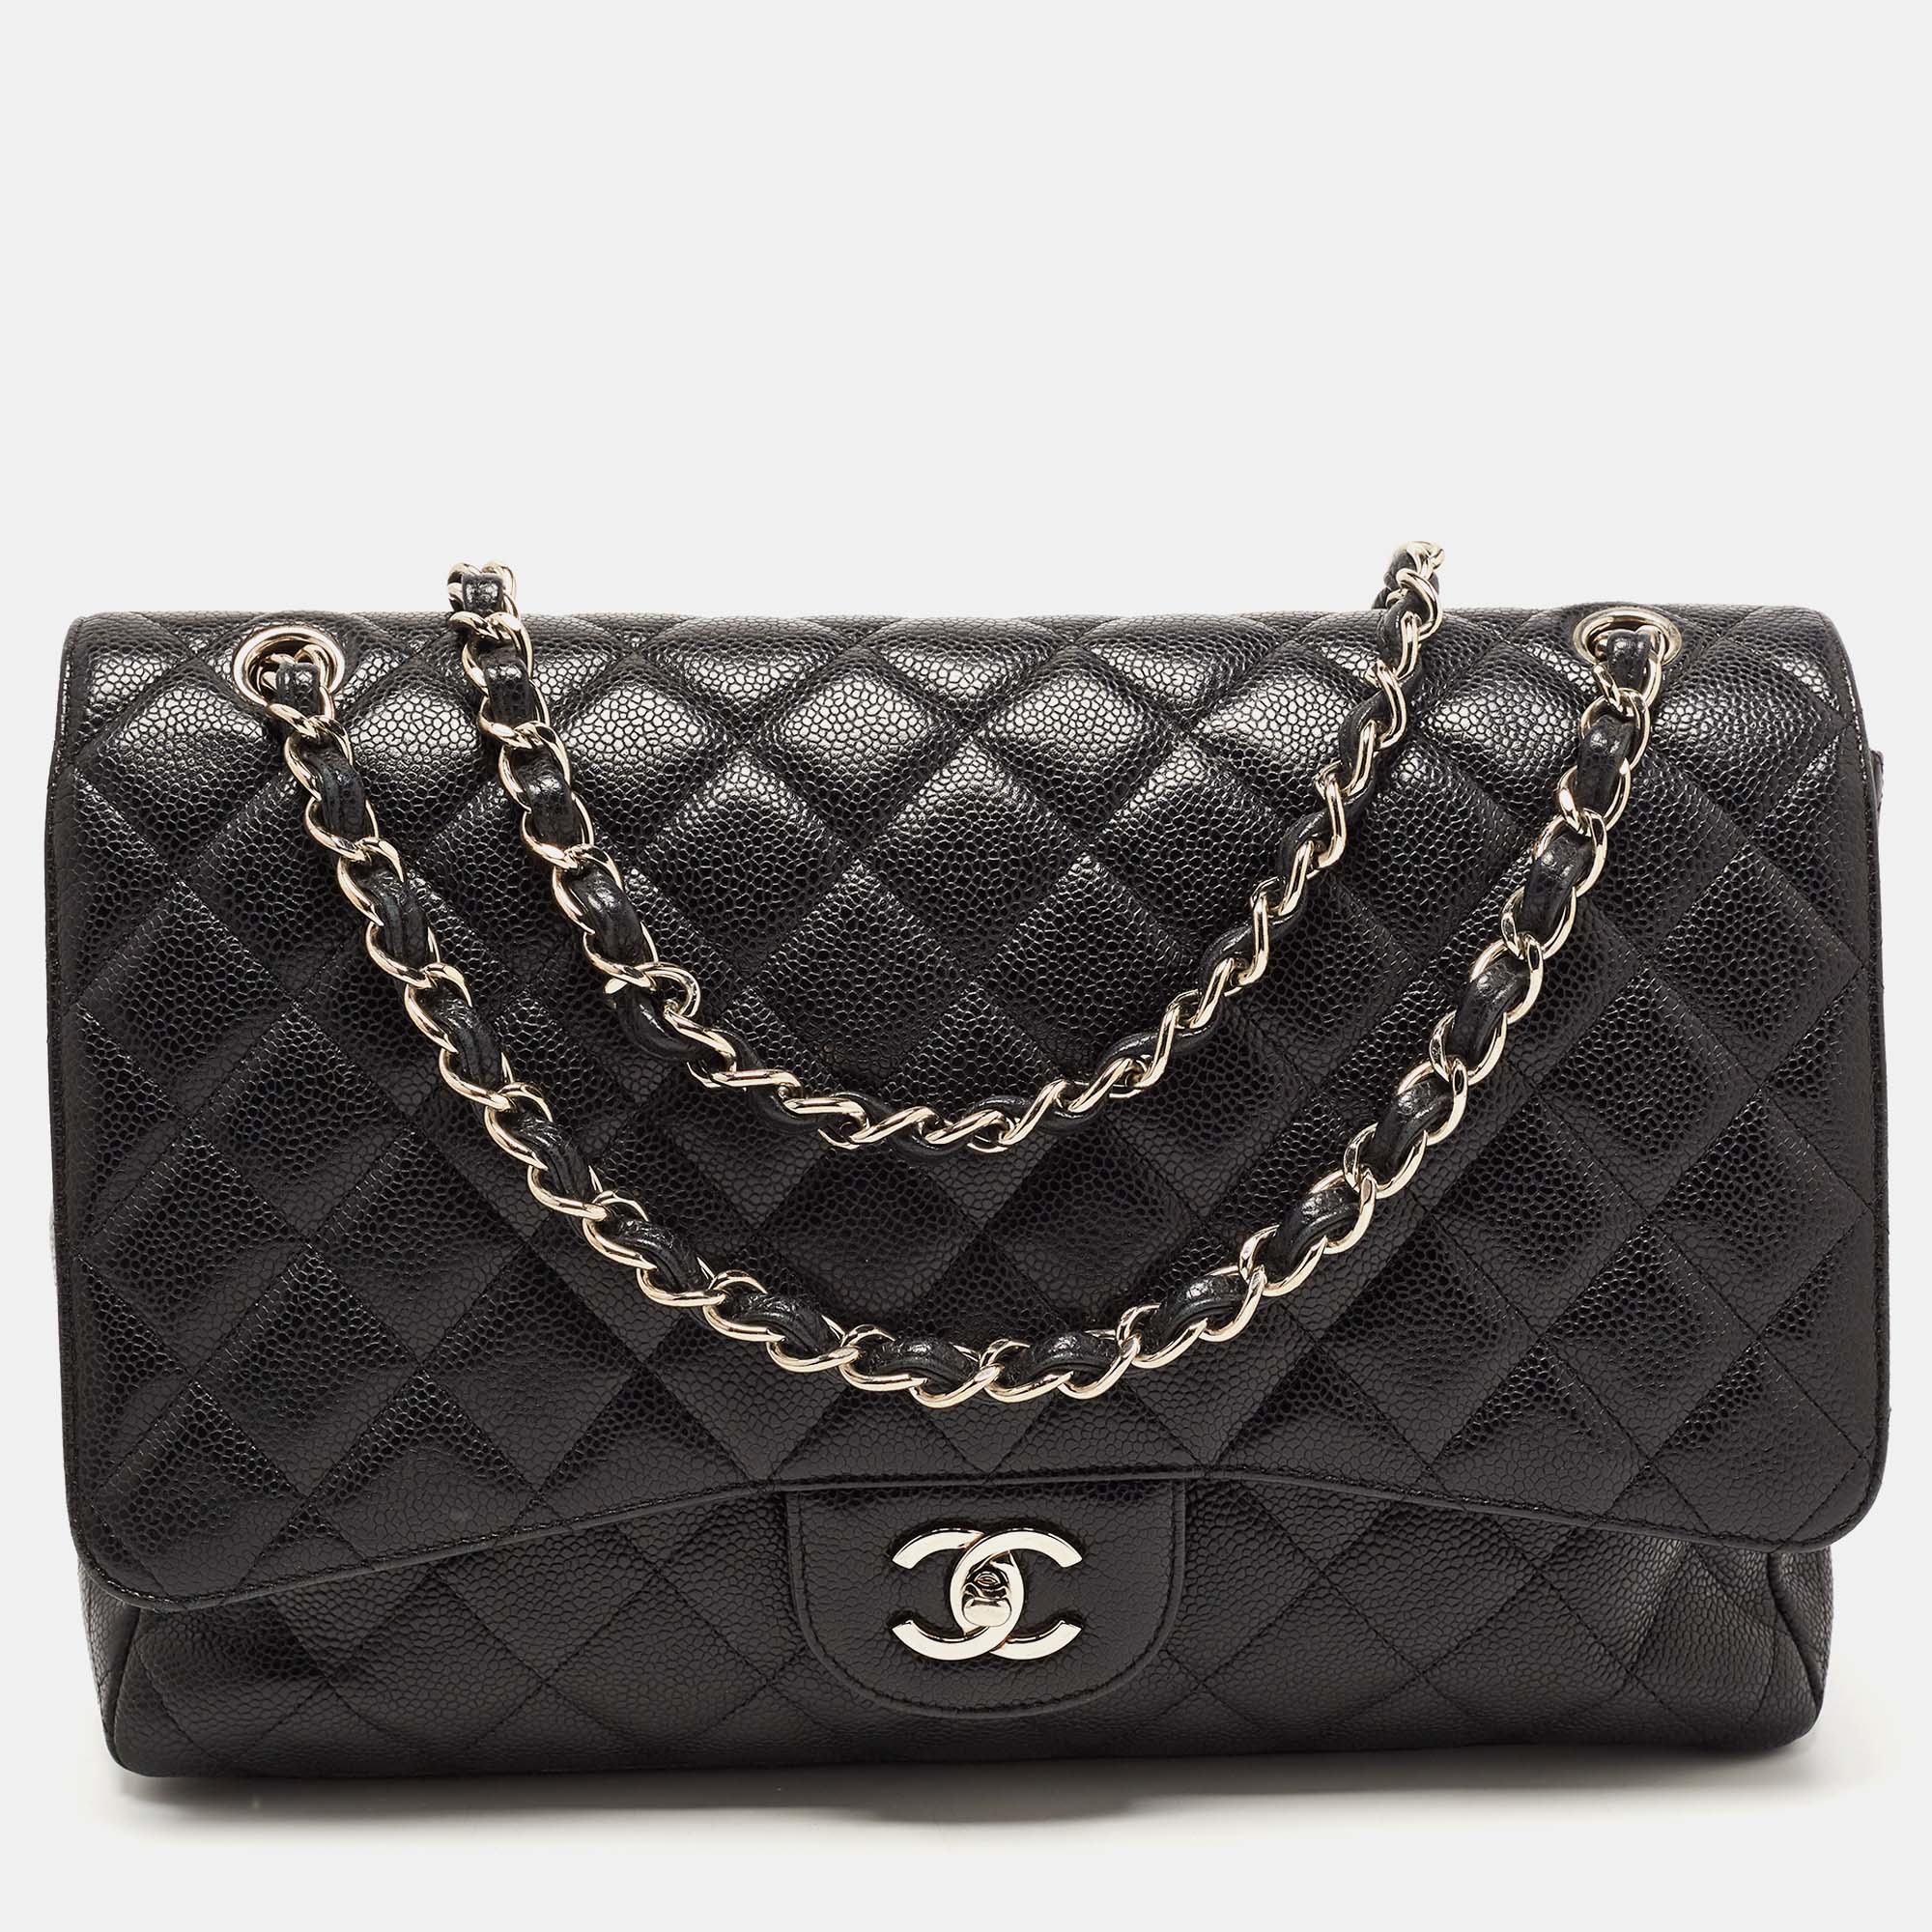 Pre-owned Chanel Black Quilted Caviar Leather Maxi Classic Single Flap Bag